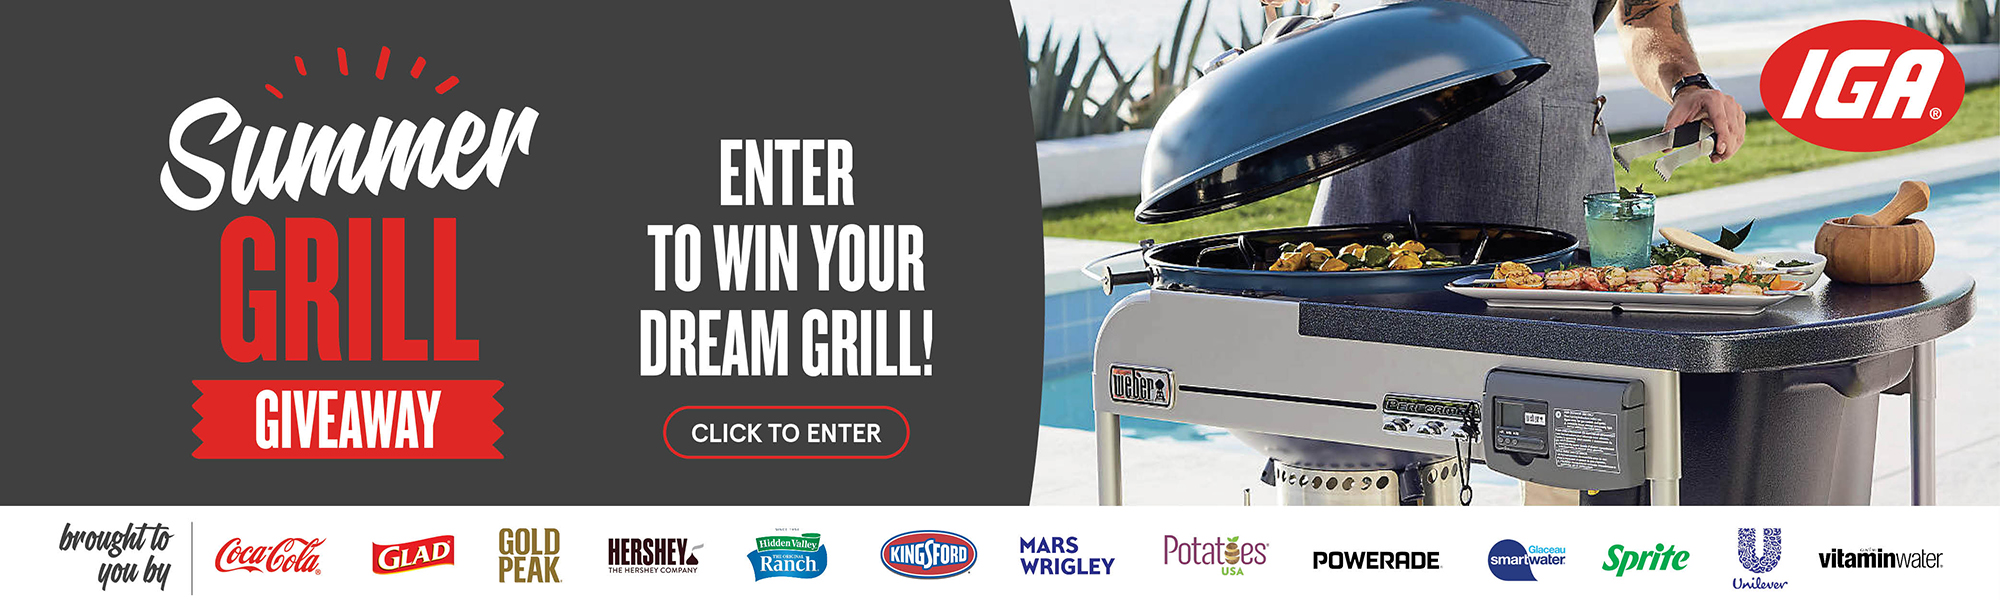 Enter the Summer Grill Giveaway